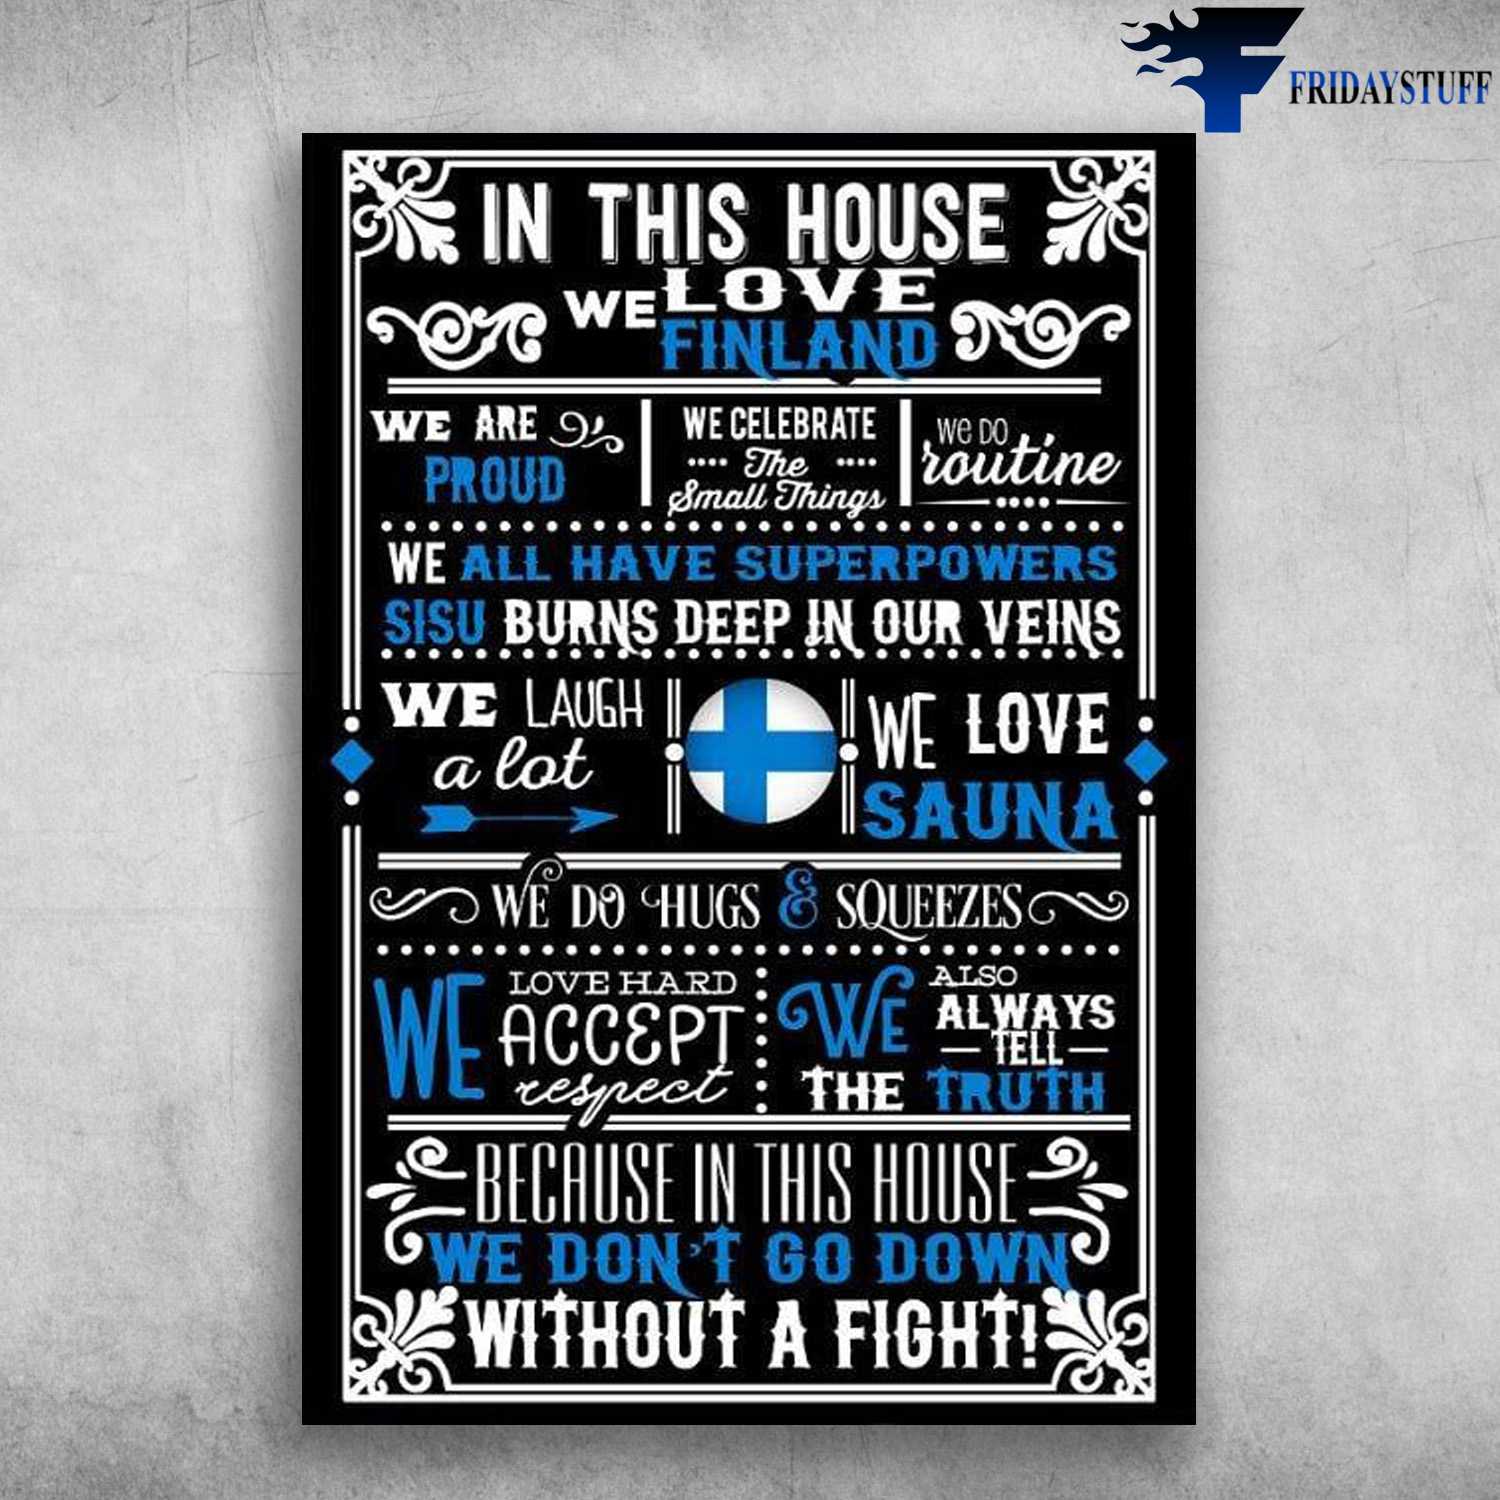 Finland Family - In This House, We Love Finland, We Are Pround, We Celebrate The Small Things, We Do Routine, We All Have Superpowers, Sisu Burns Deep In Our Weins, We Laugh A Lot, We Love Sauna